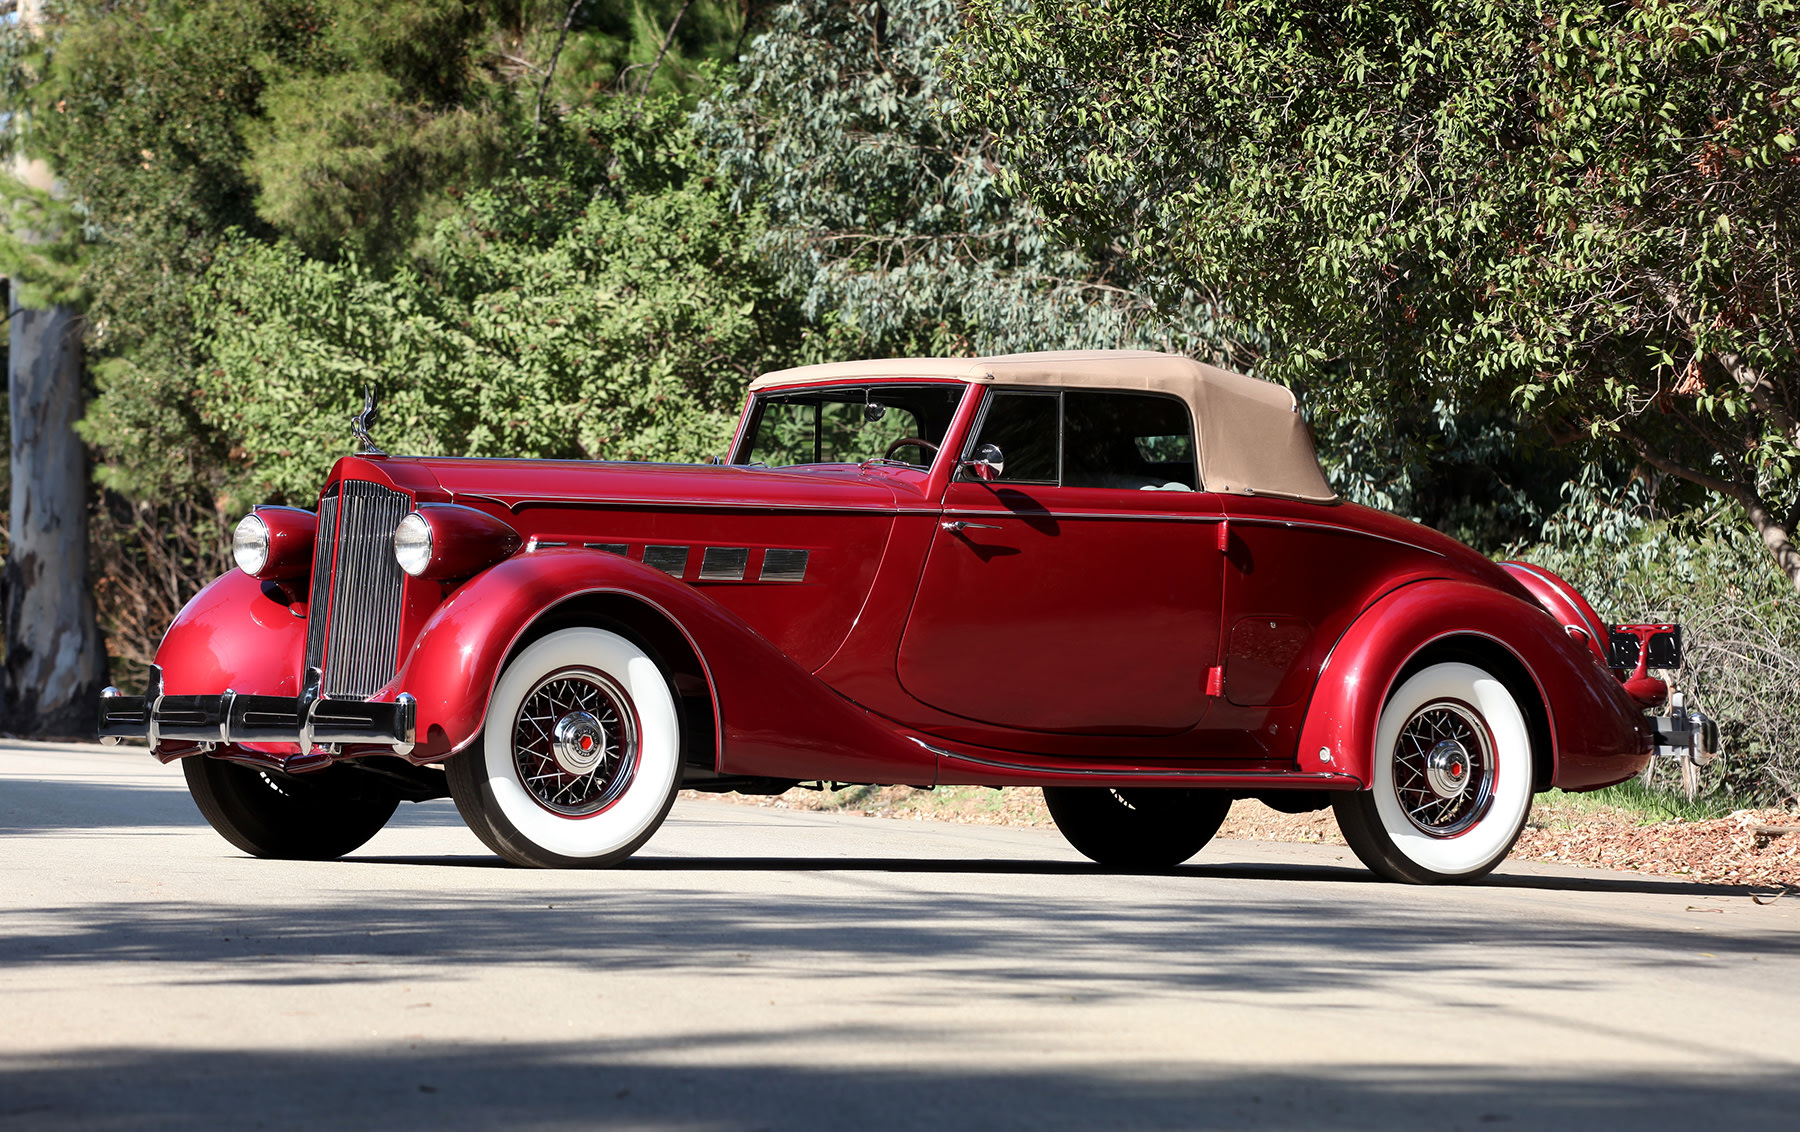 1935 Packard Super Eight Model 1204 Coupe Roadster